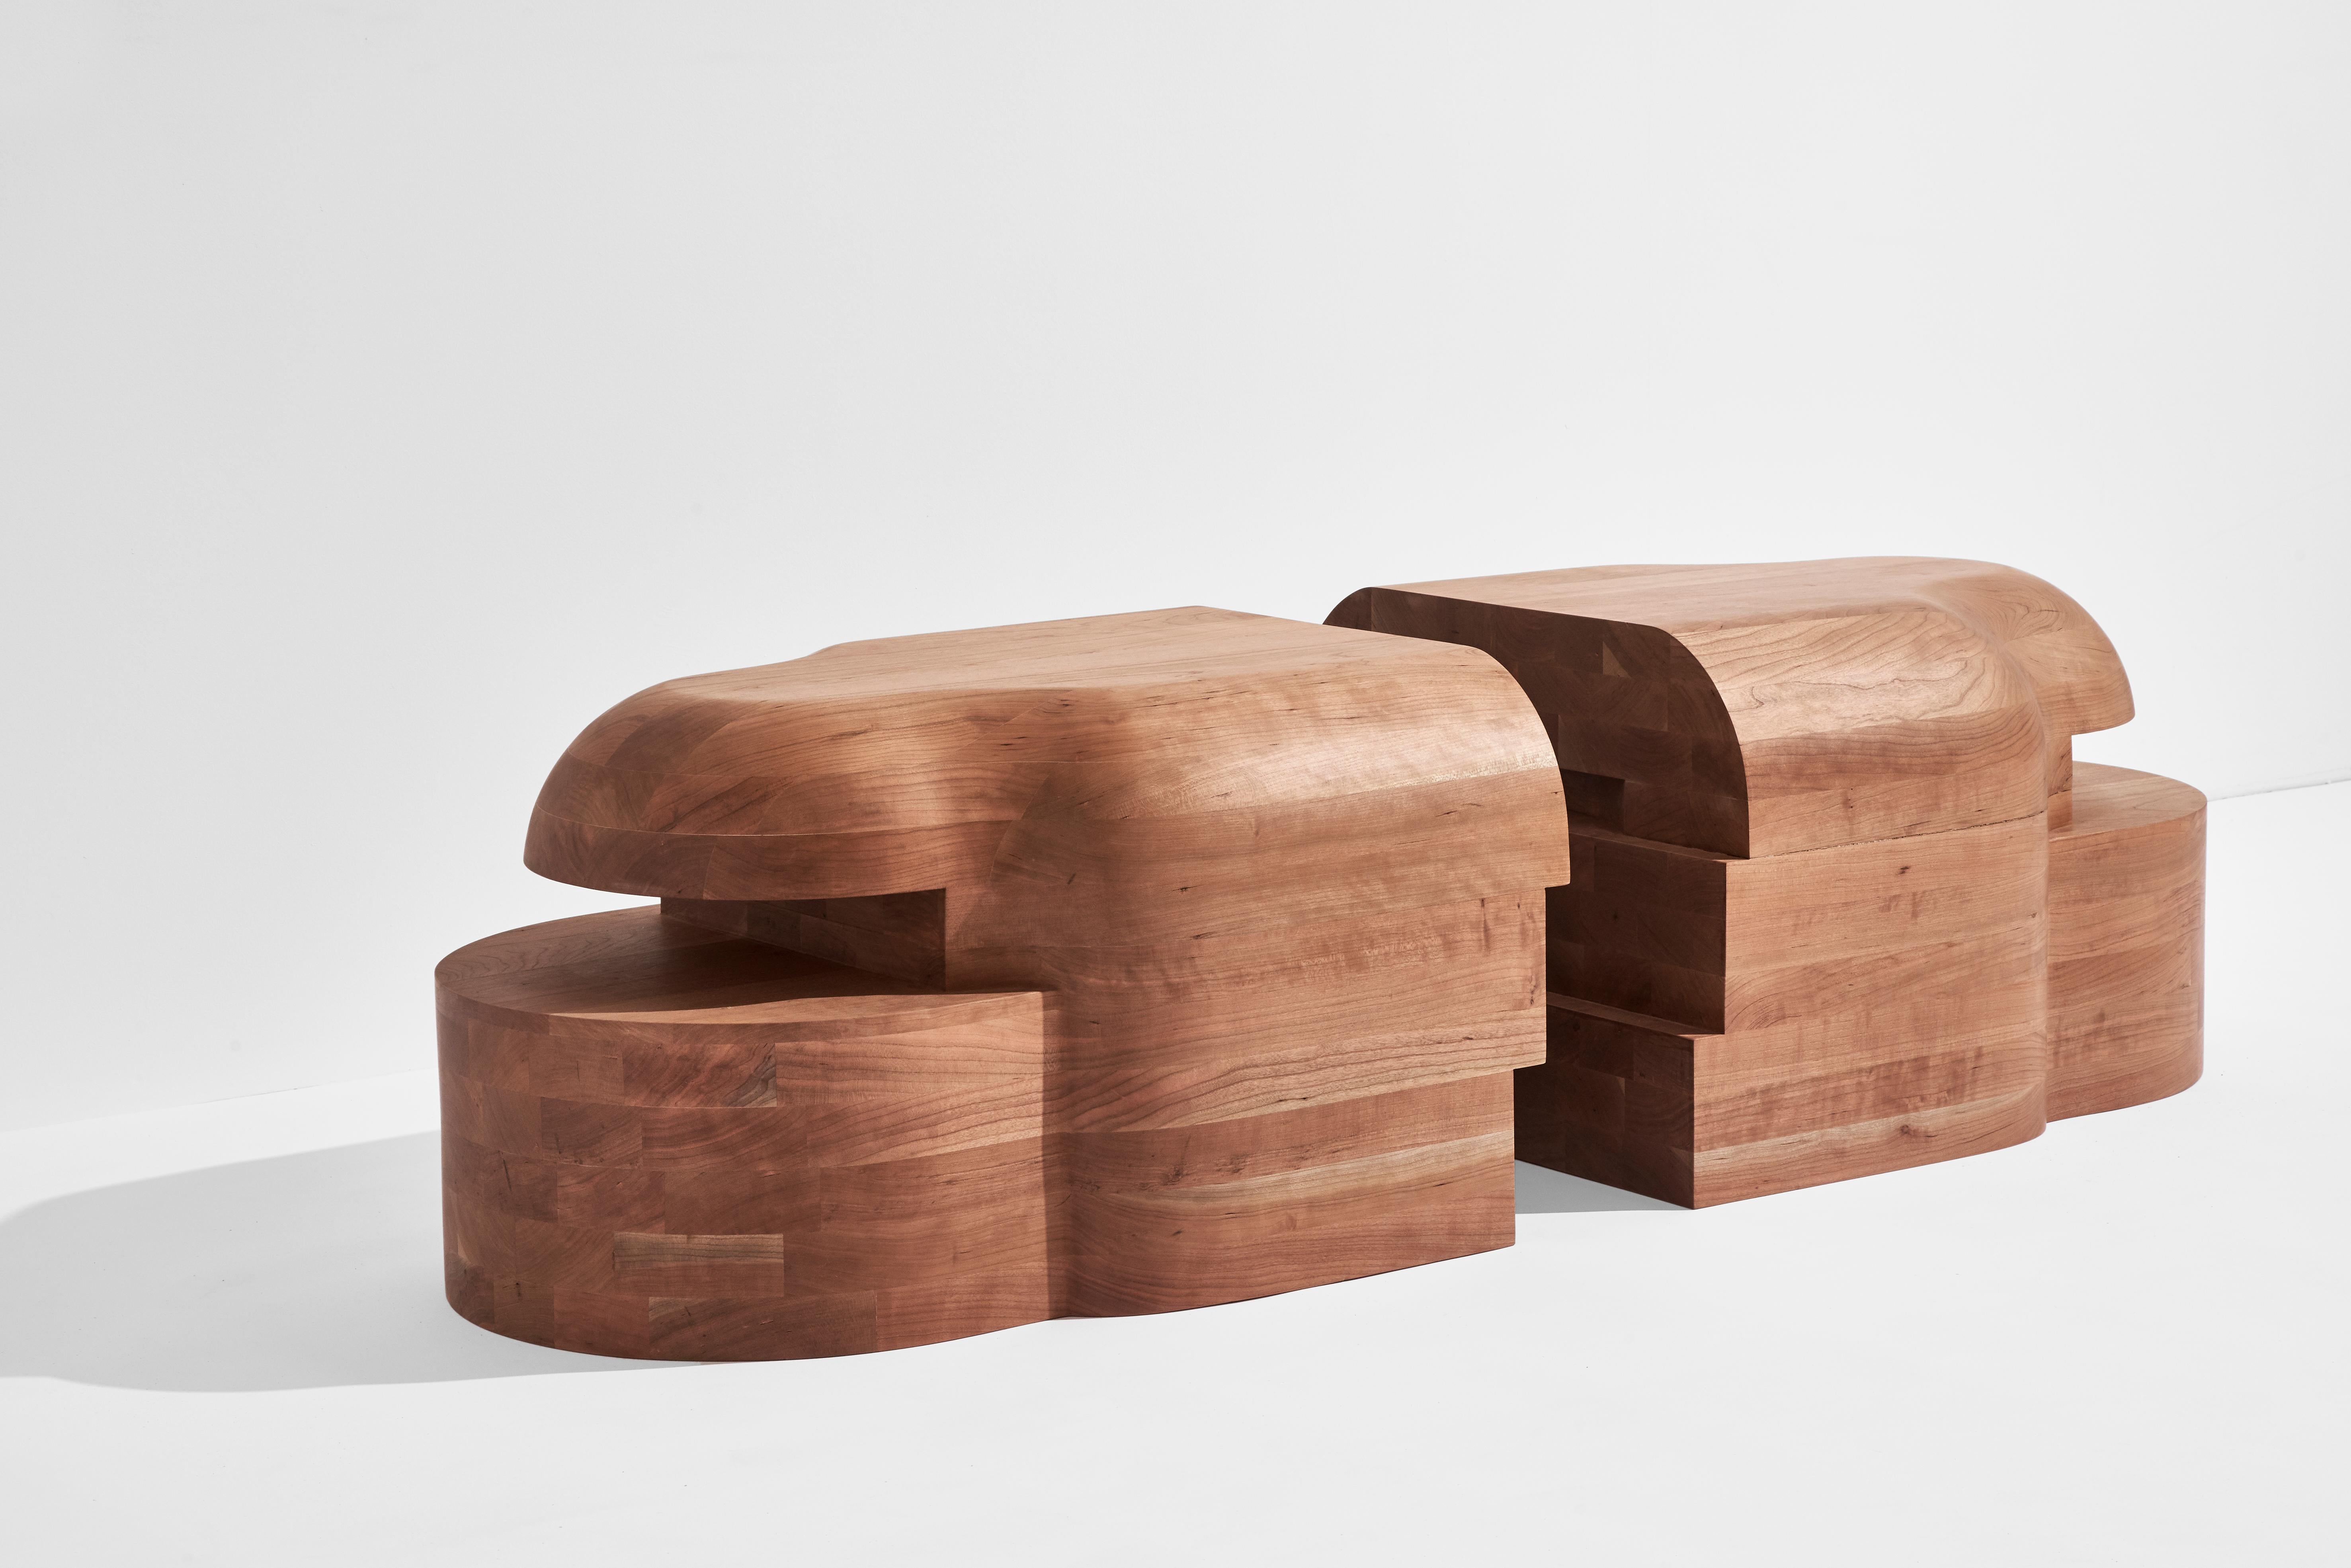 Set Lhamu bench by Sizar Alexis
Limited Edition of 10 Pieces
Dimensions: L 160 x W 60 x H 45 cm
Materials: American Cherry 

Lahmu When me and my wife got home from the maternity ward in april 2020, we made sure that we were protected from the